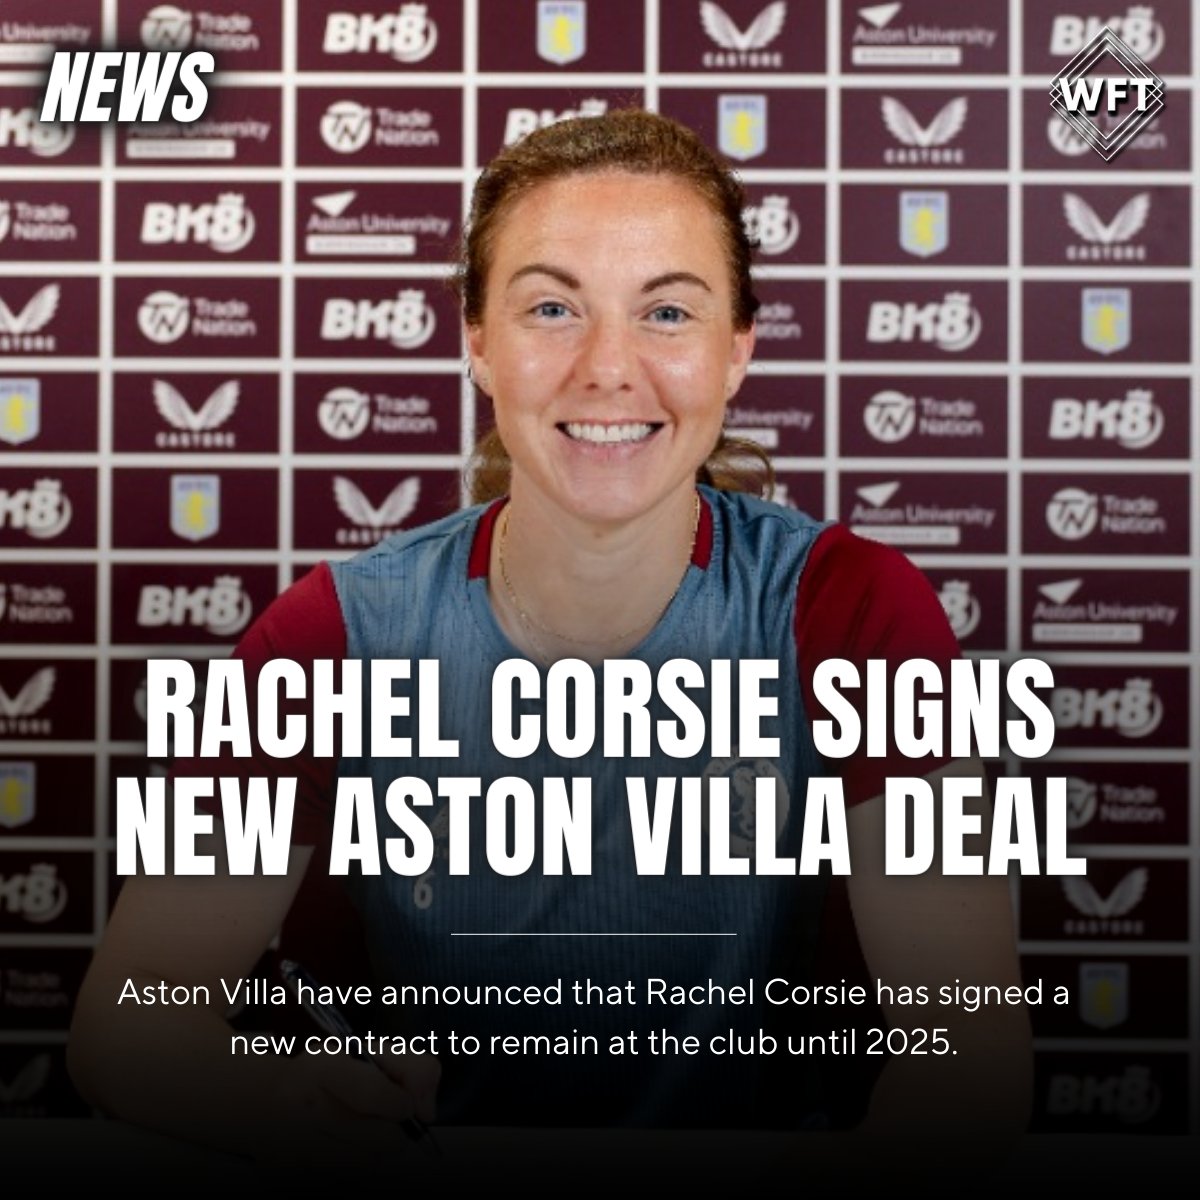 Aston Villa have announced that captain Rachel Corsie has signed a new contract to remain at the club until 2025. #AVFC #BarclaysWSL